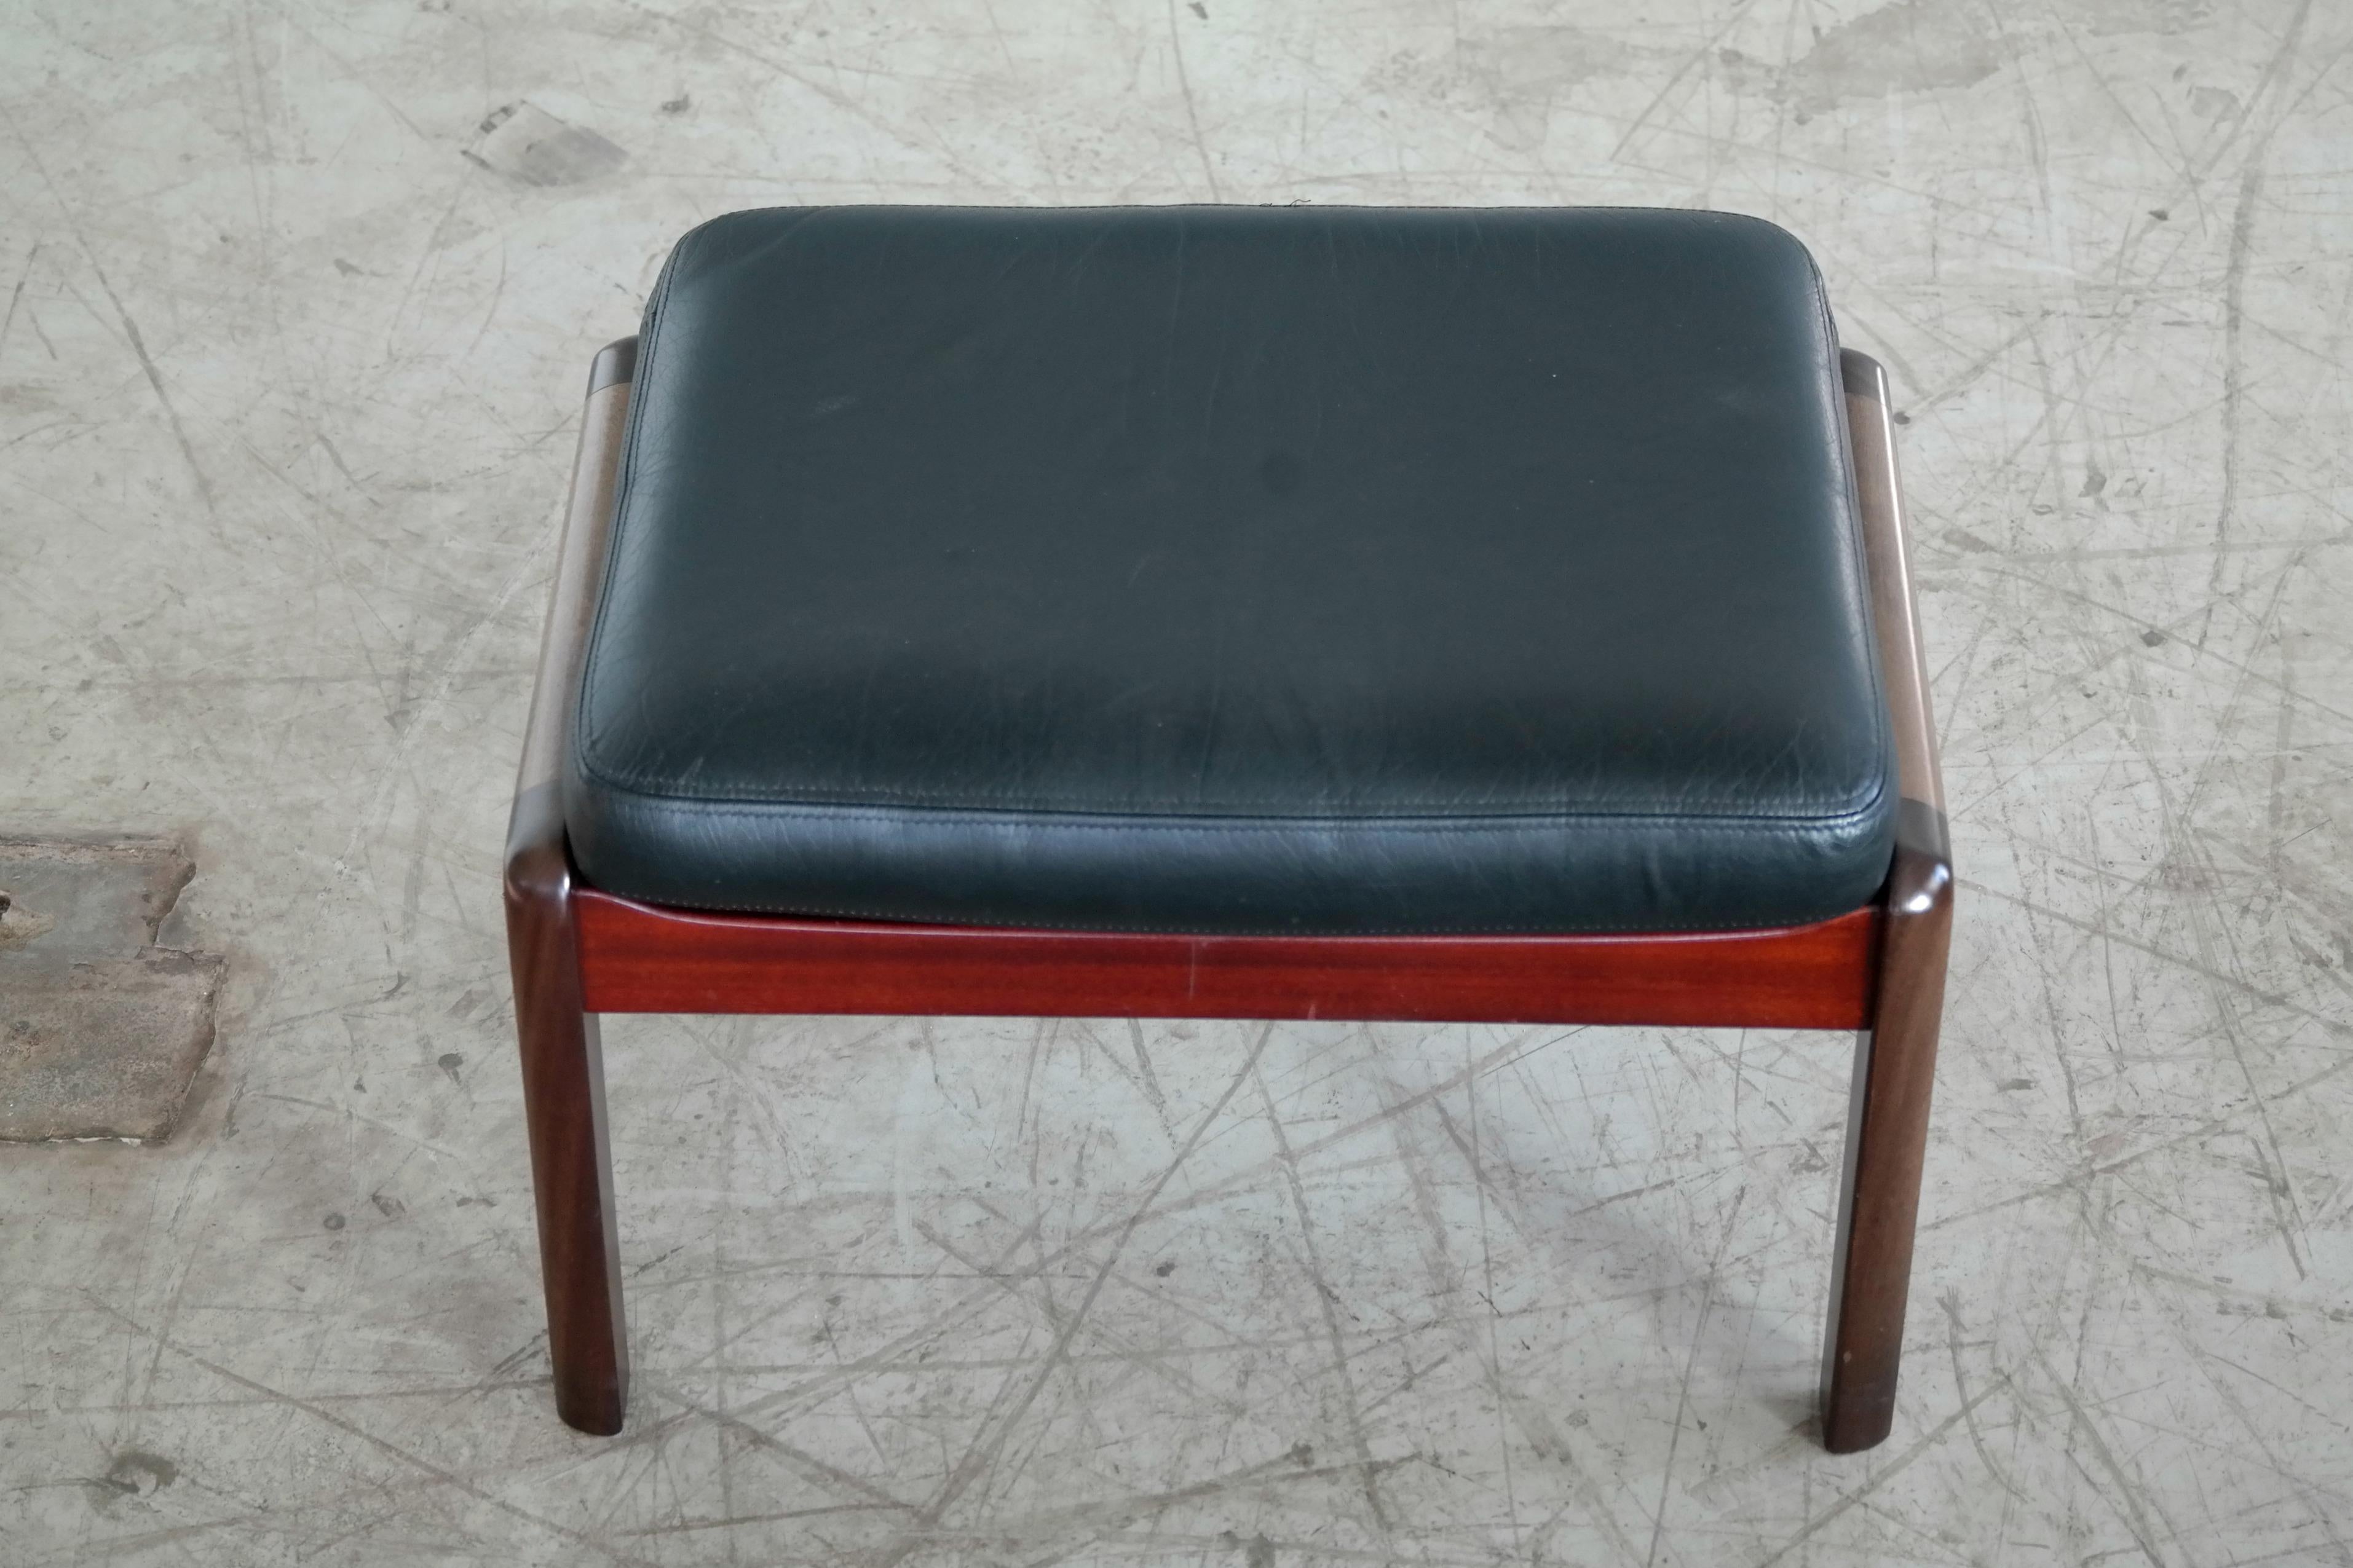 Beautiful ottoman or footstool designed by Ole Wanscher for P. Jeppesen in the 1950s. Manufactured in mahogany and topped with a handstitched leather cushion in supple black leather. A great Danish midcentury high-end design that could be paired